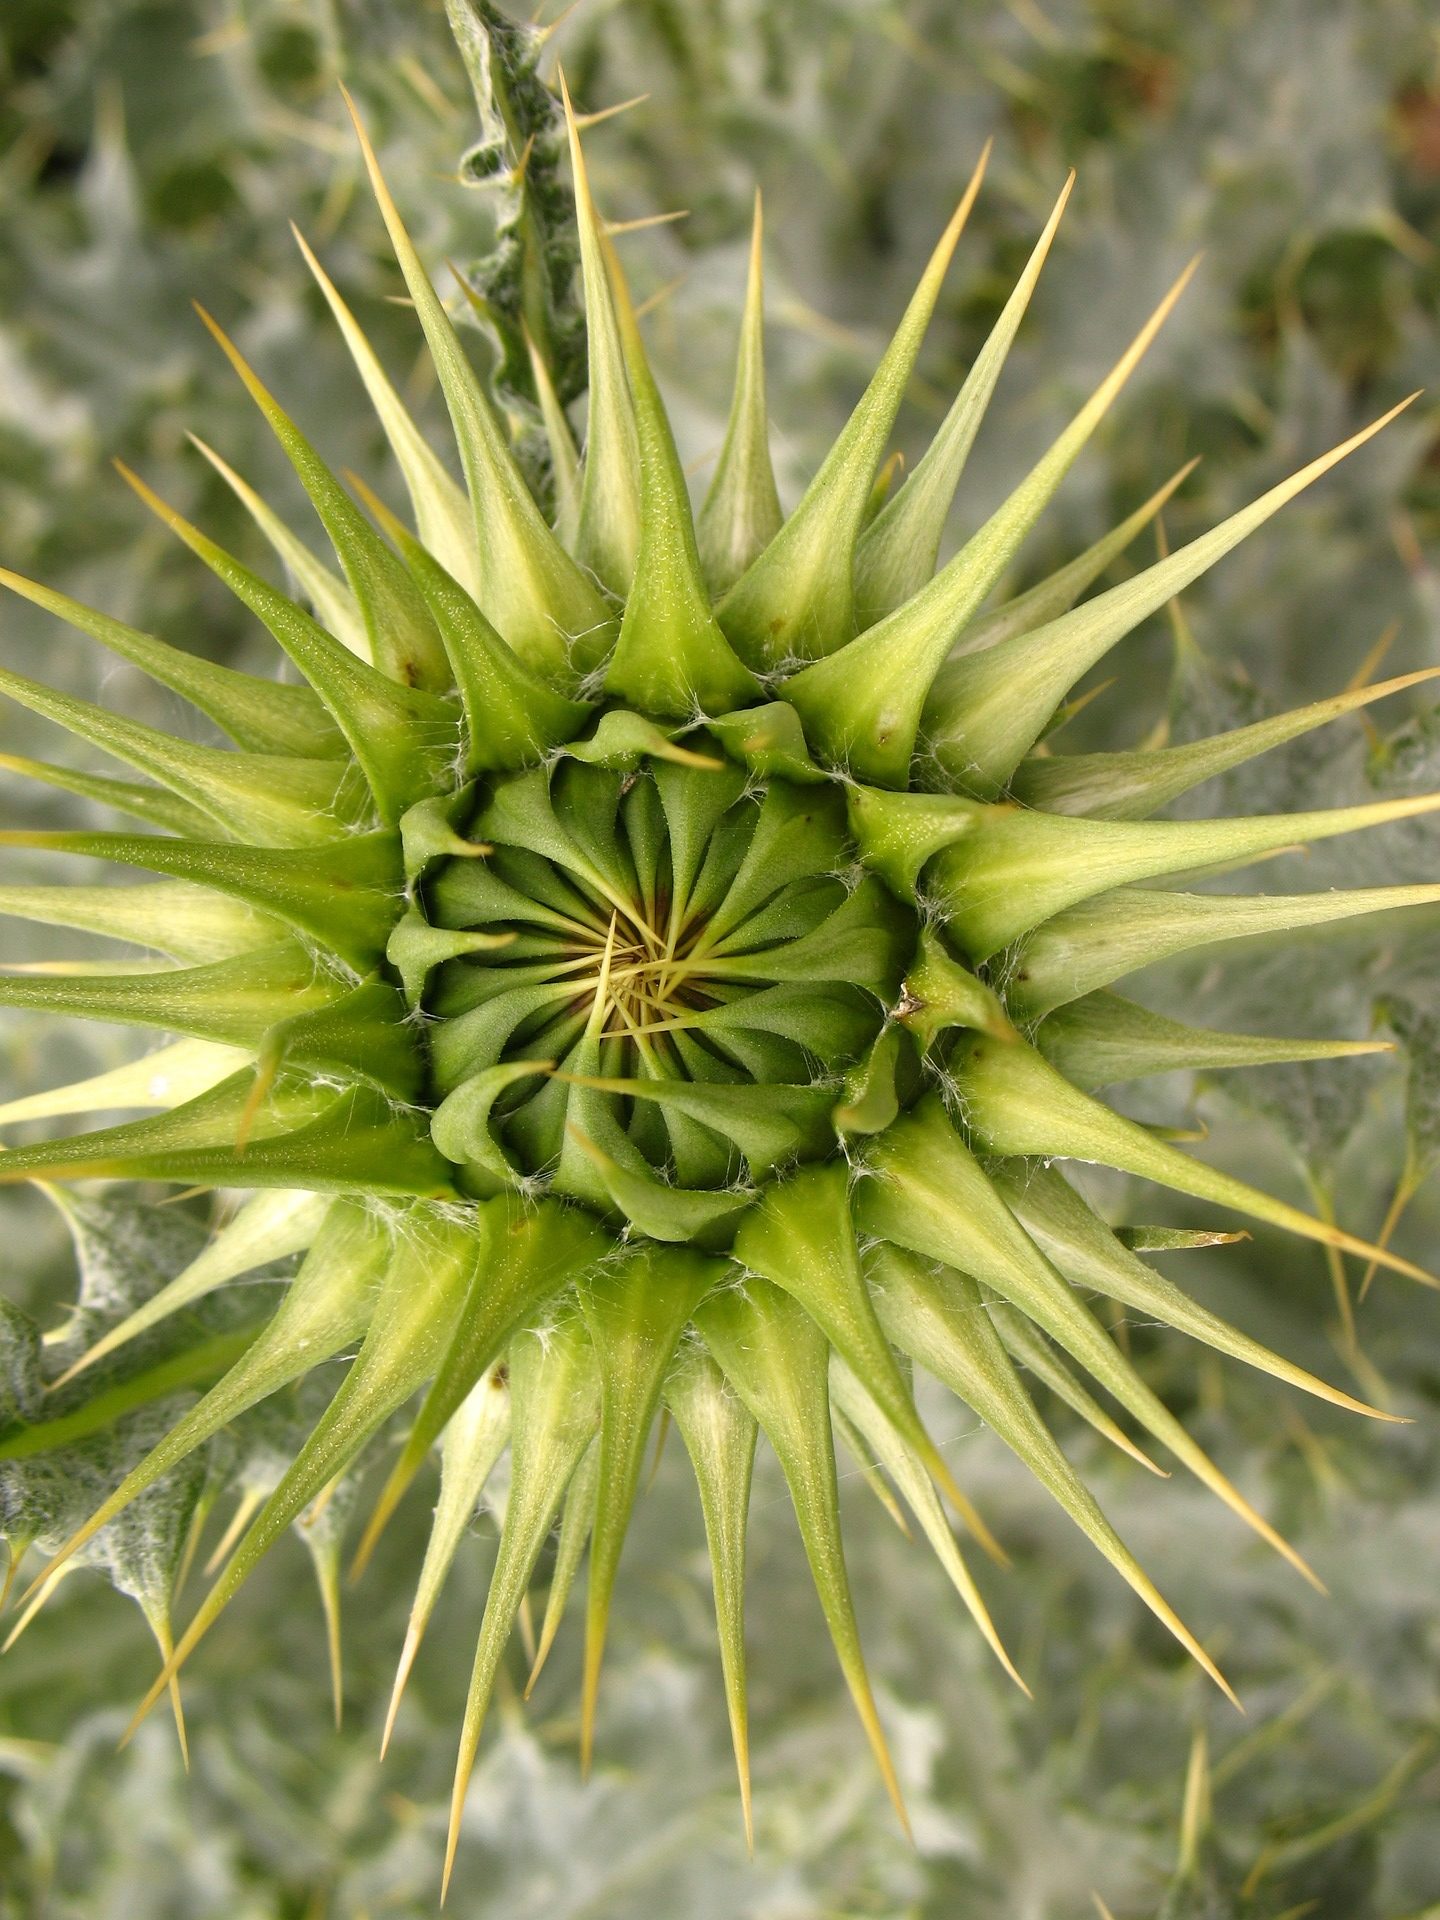 A photograph of a thistle before its bloom. The flower bud is surrounded by sharp thorn-like leaves.